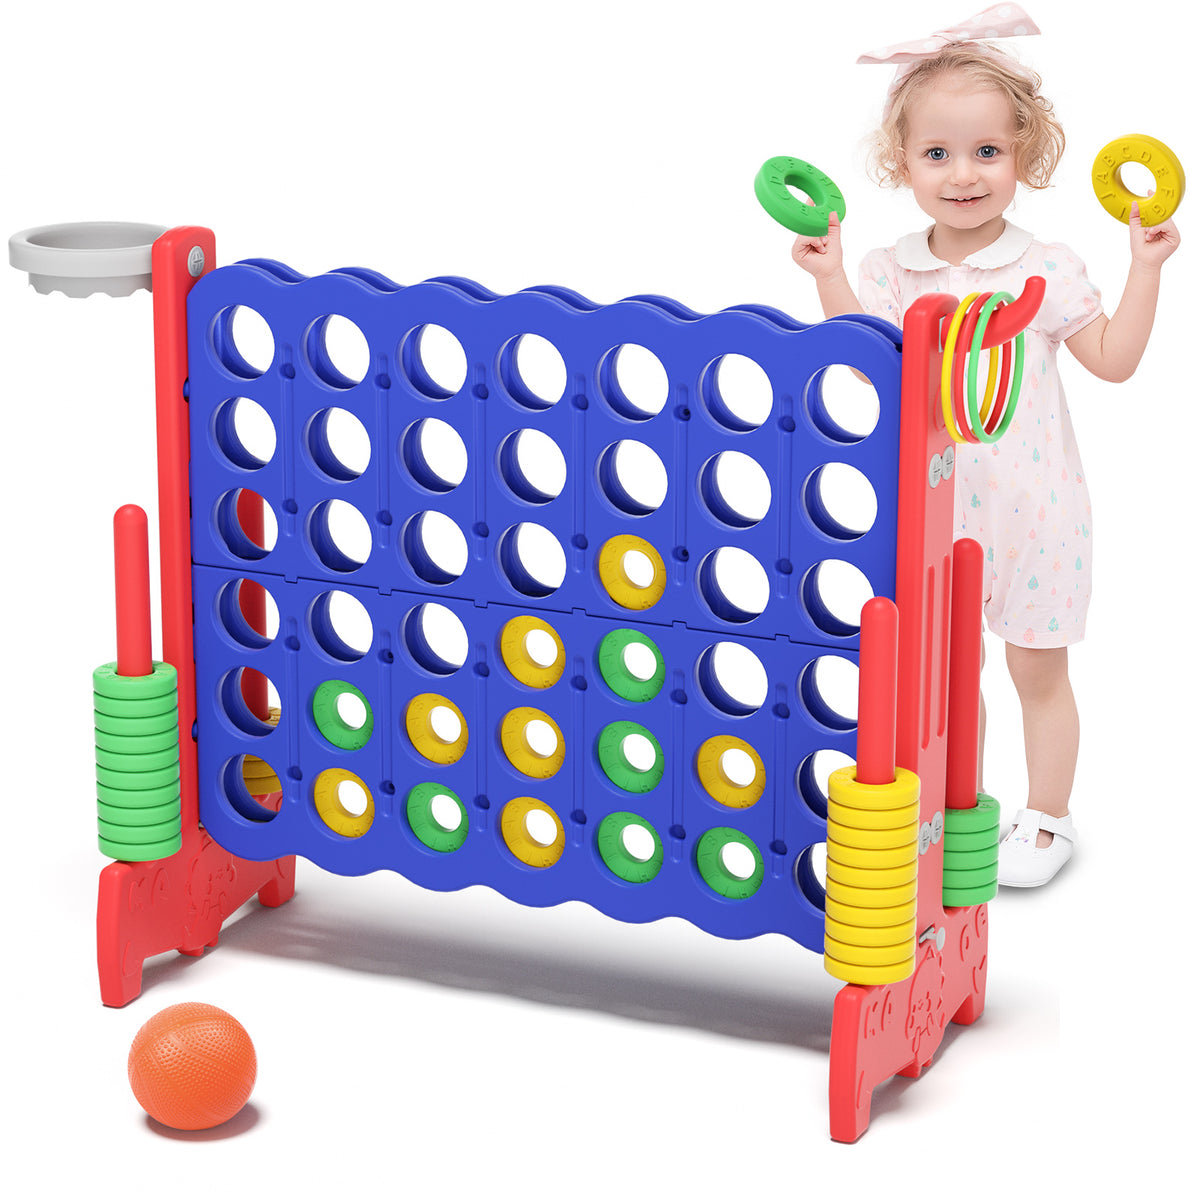 XJD Giant 4-in-A-Row Jumbo Game, 4-to-Score Game Set with Basketball Hoop, Ring Toss, 42 Jumbo Rings, Indoor Outdoor Family Game for Kids & Adults. Blue&Red